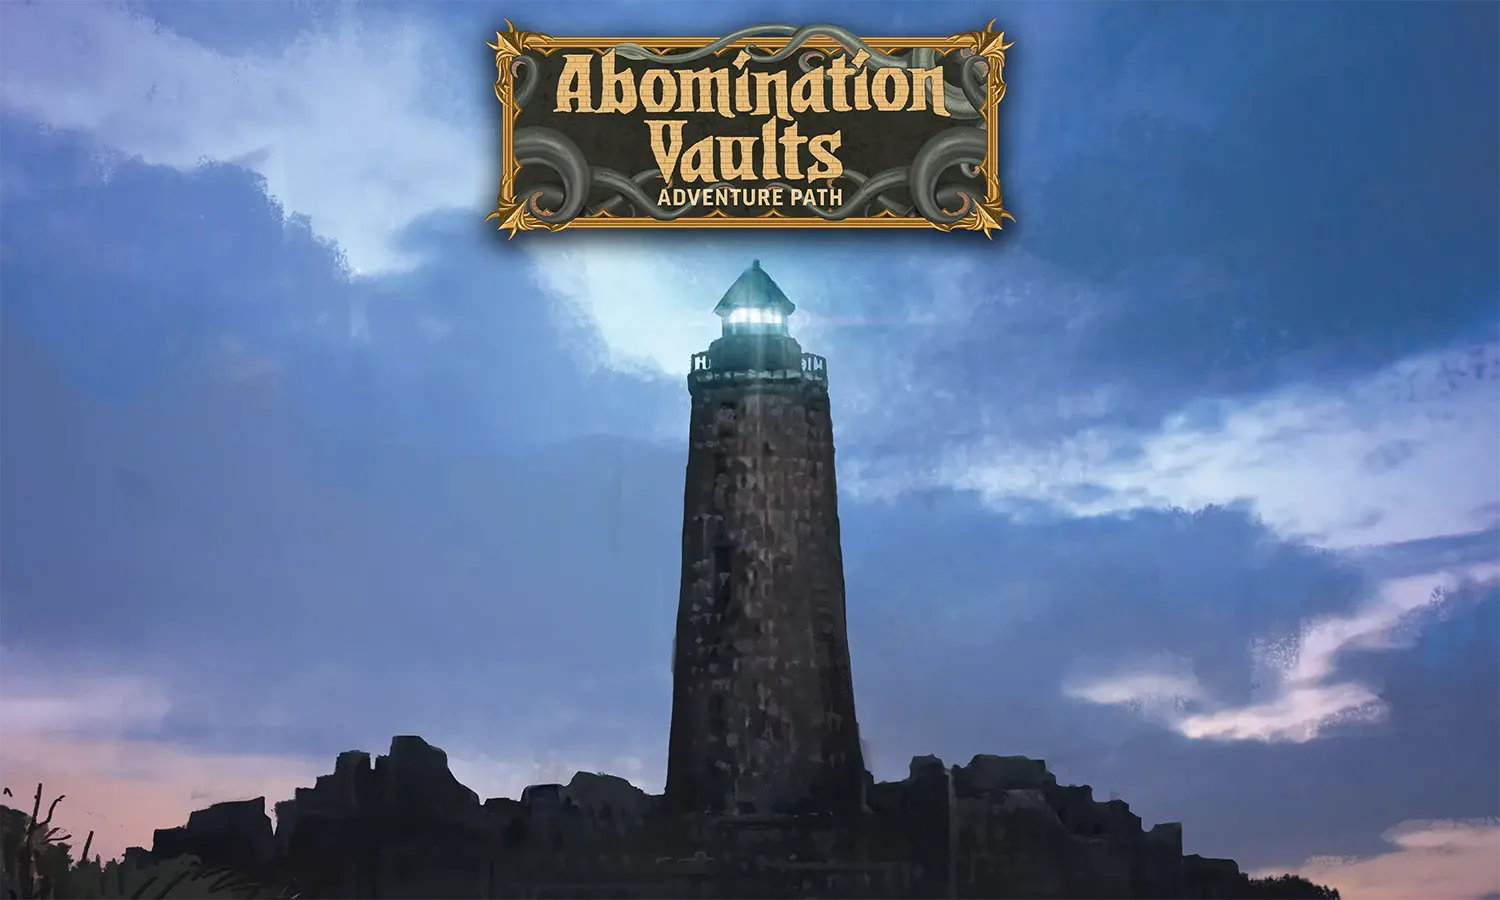 The Abomination Vaults